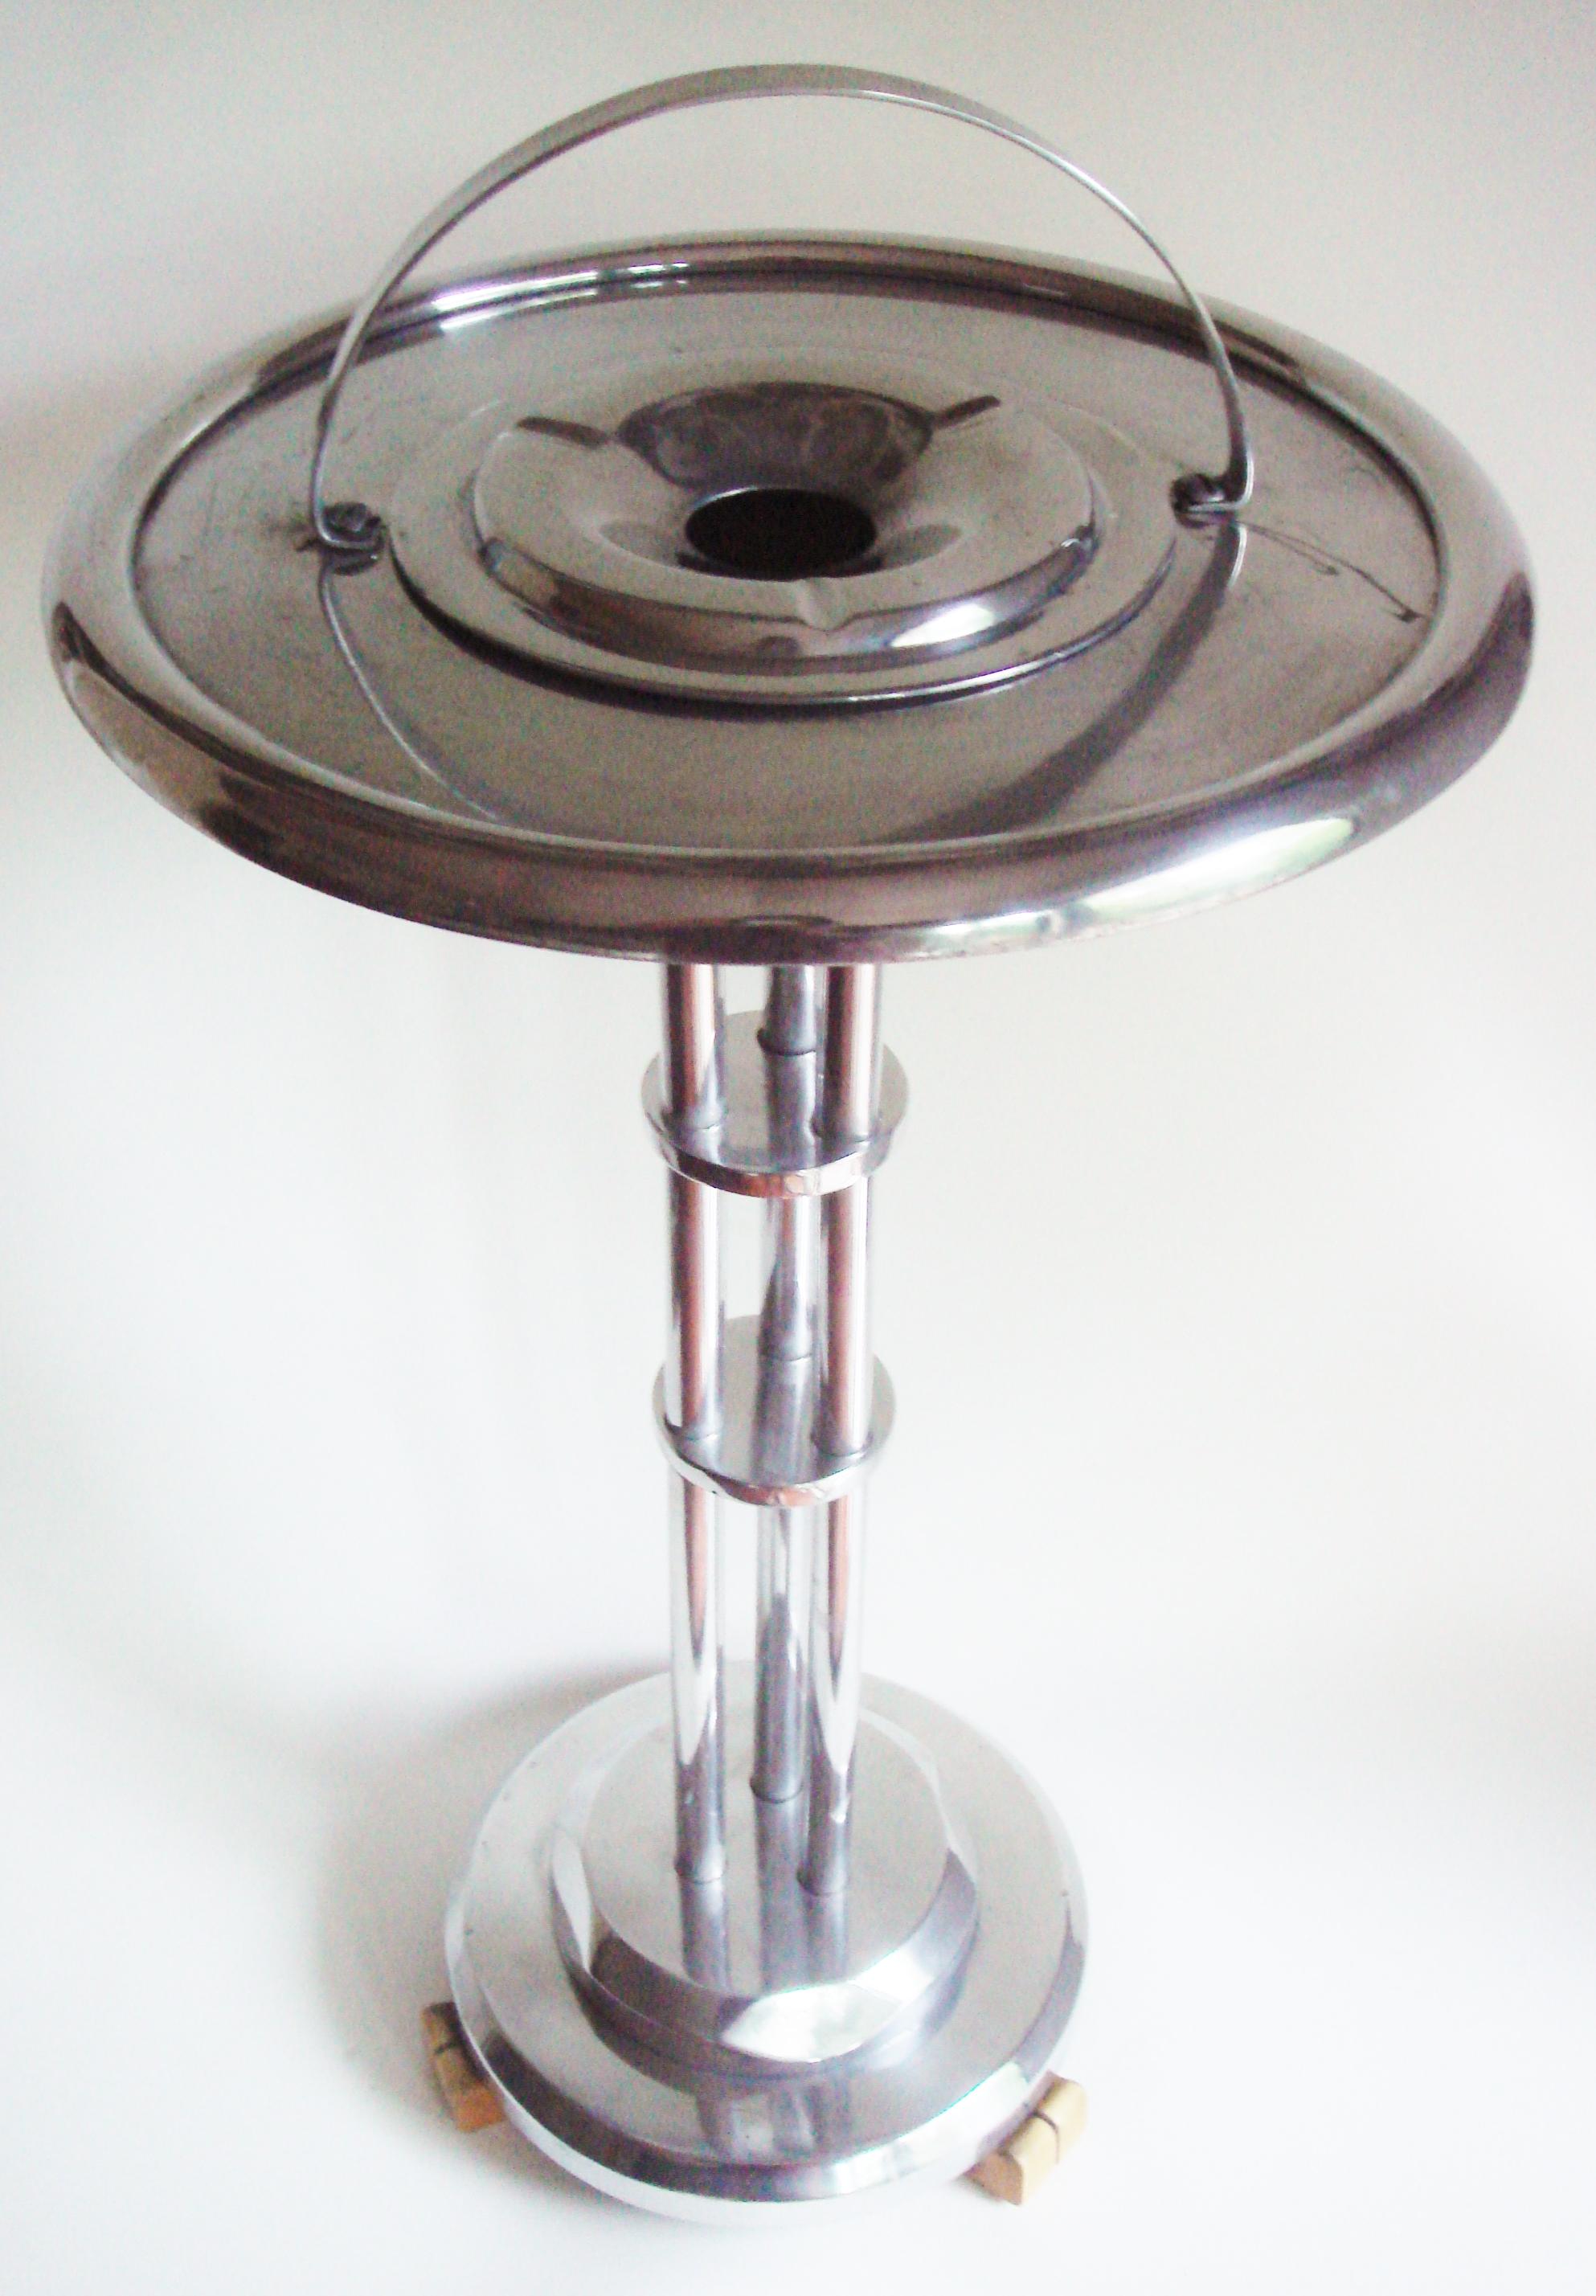 This stunning rare American Art Deco/Machine Age polished Aluminum floor standing ashtray/smoker's table stands on three butterscotch Bakelite feet. It looks as though it should be in Buck Roger's man cave. (Please see photo as it does have a